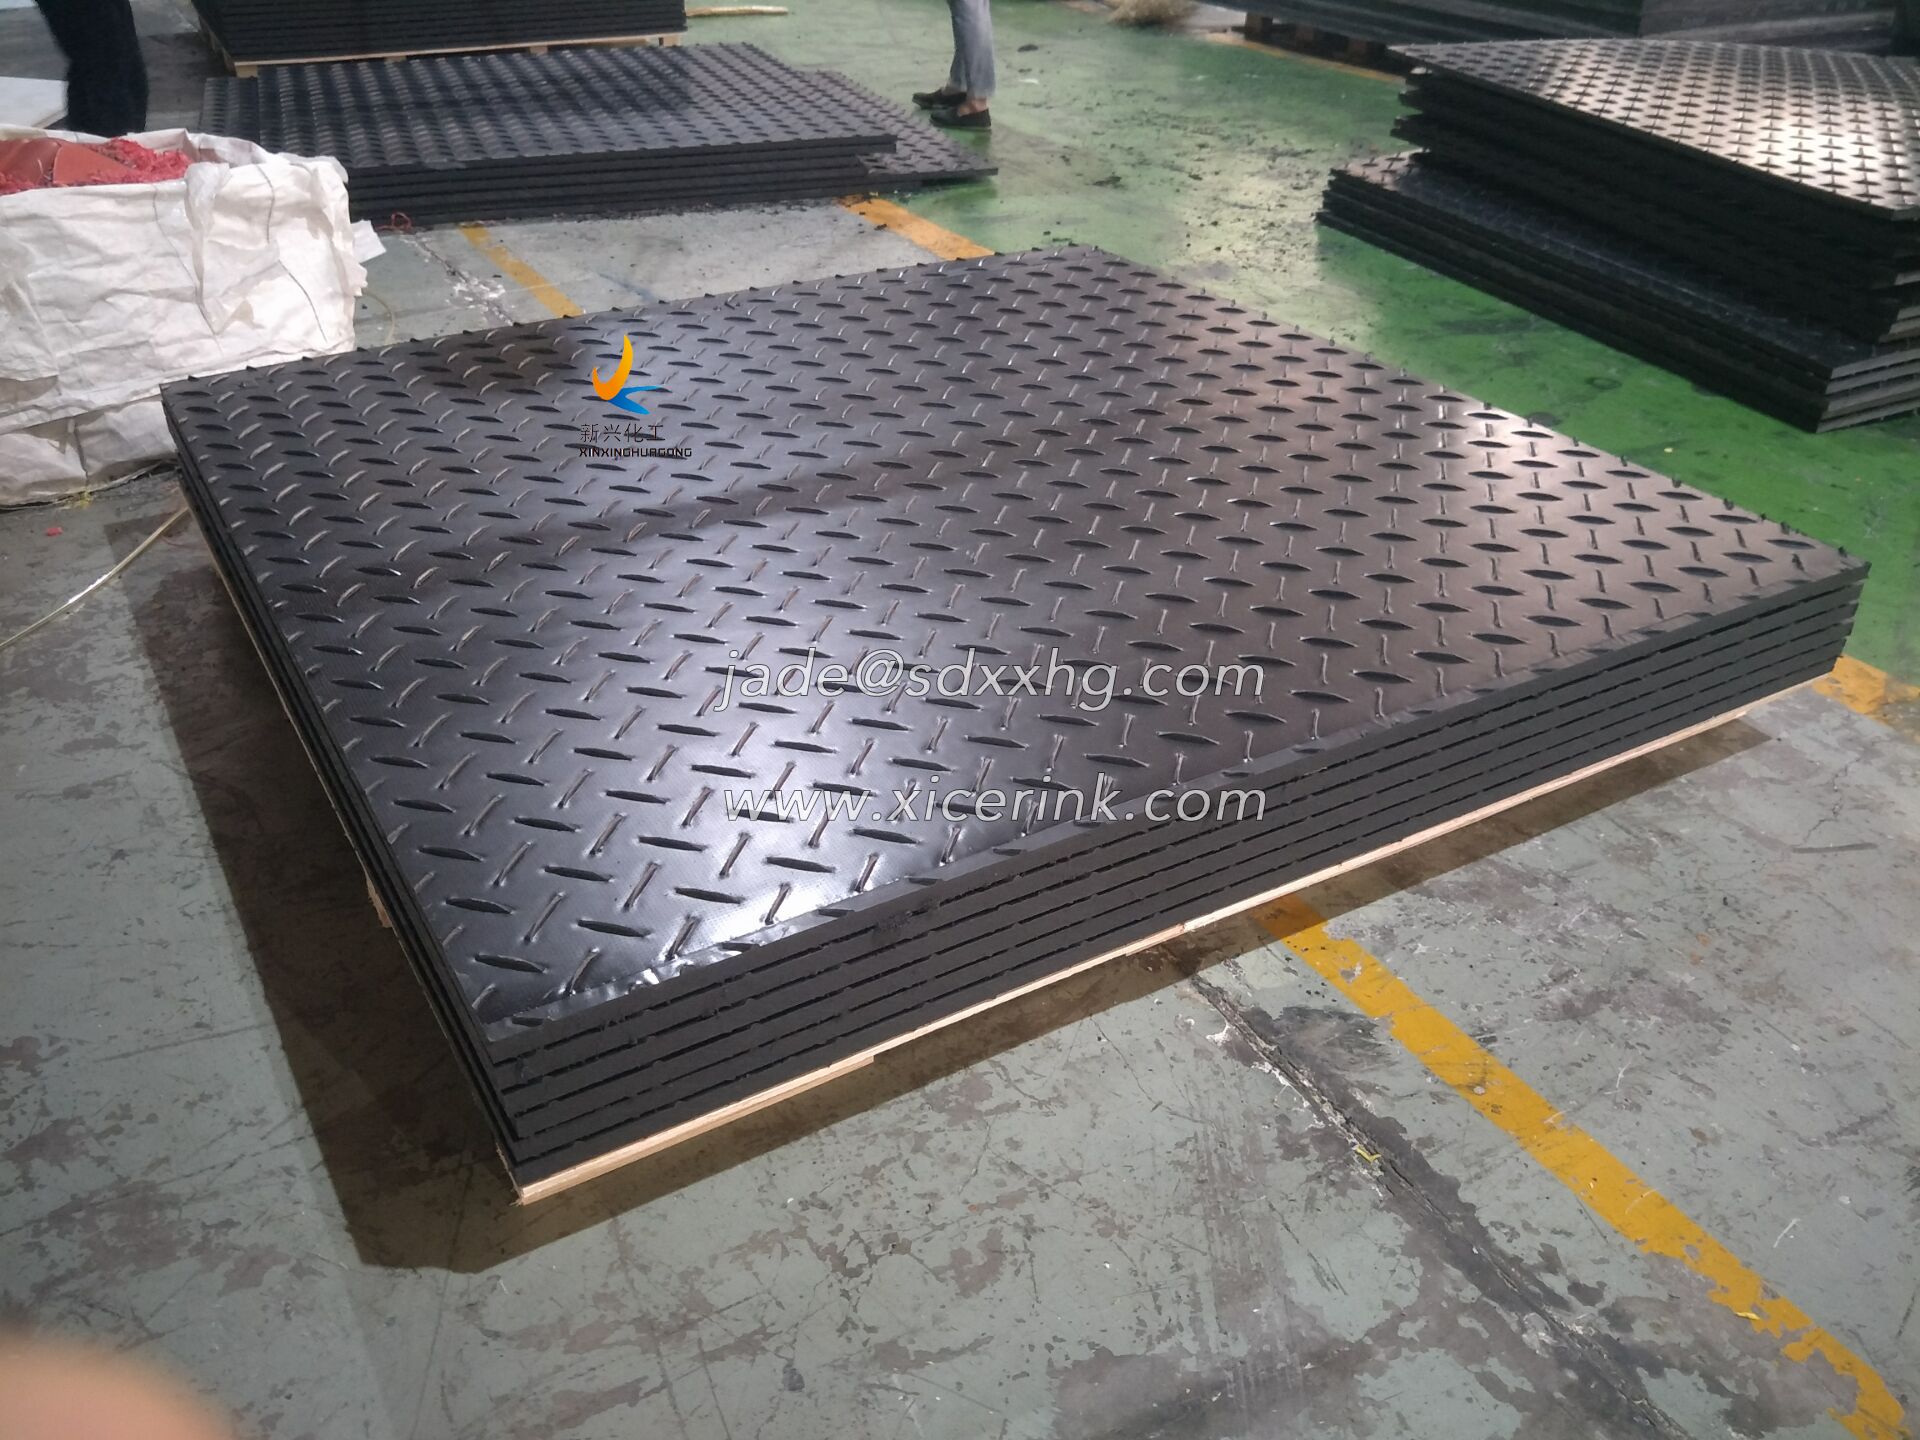 HDPE Plastic Ground Protection Mats And Heavy Duty Mud Ground Mat